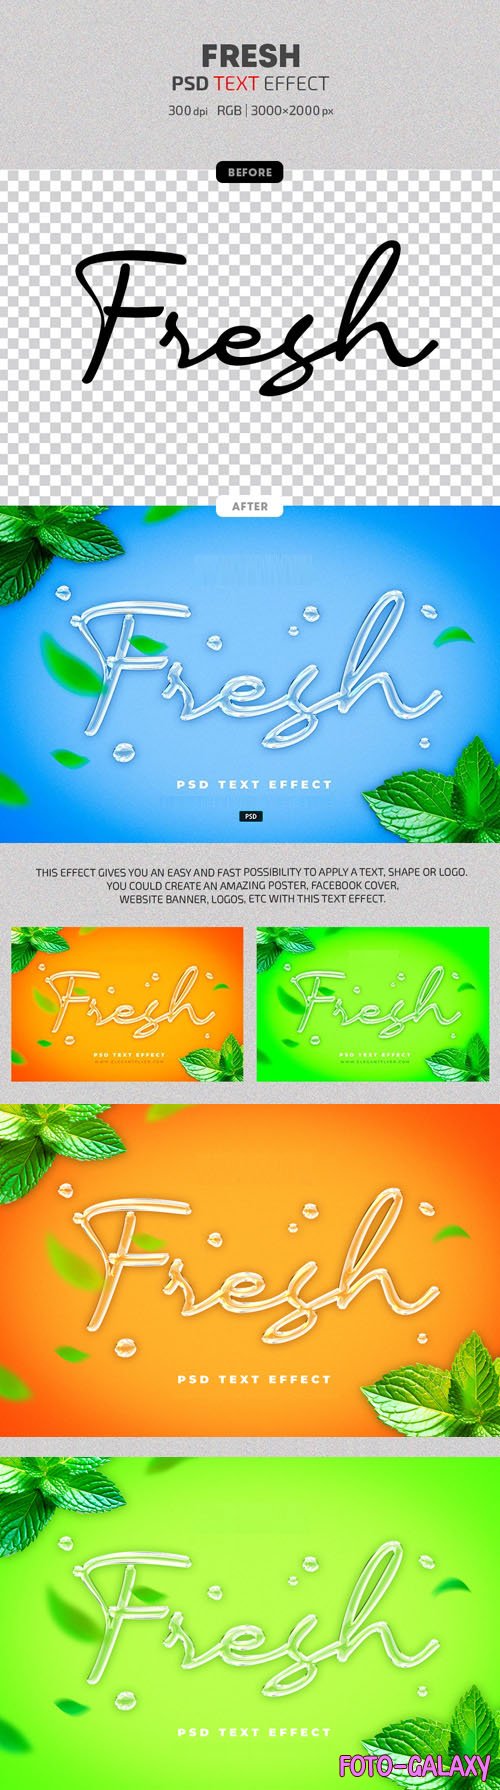 Fresh Text Effects for Photoshop